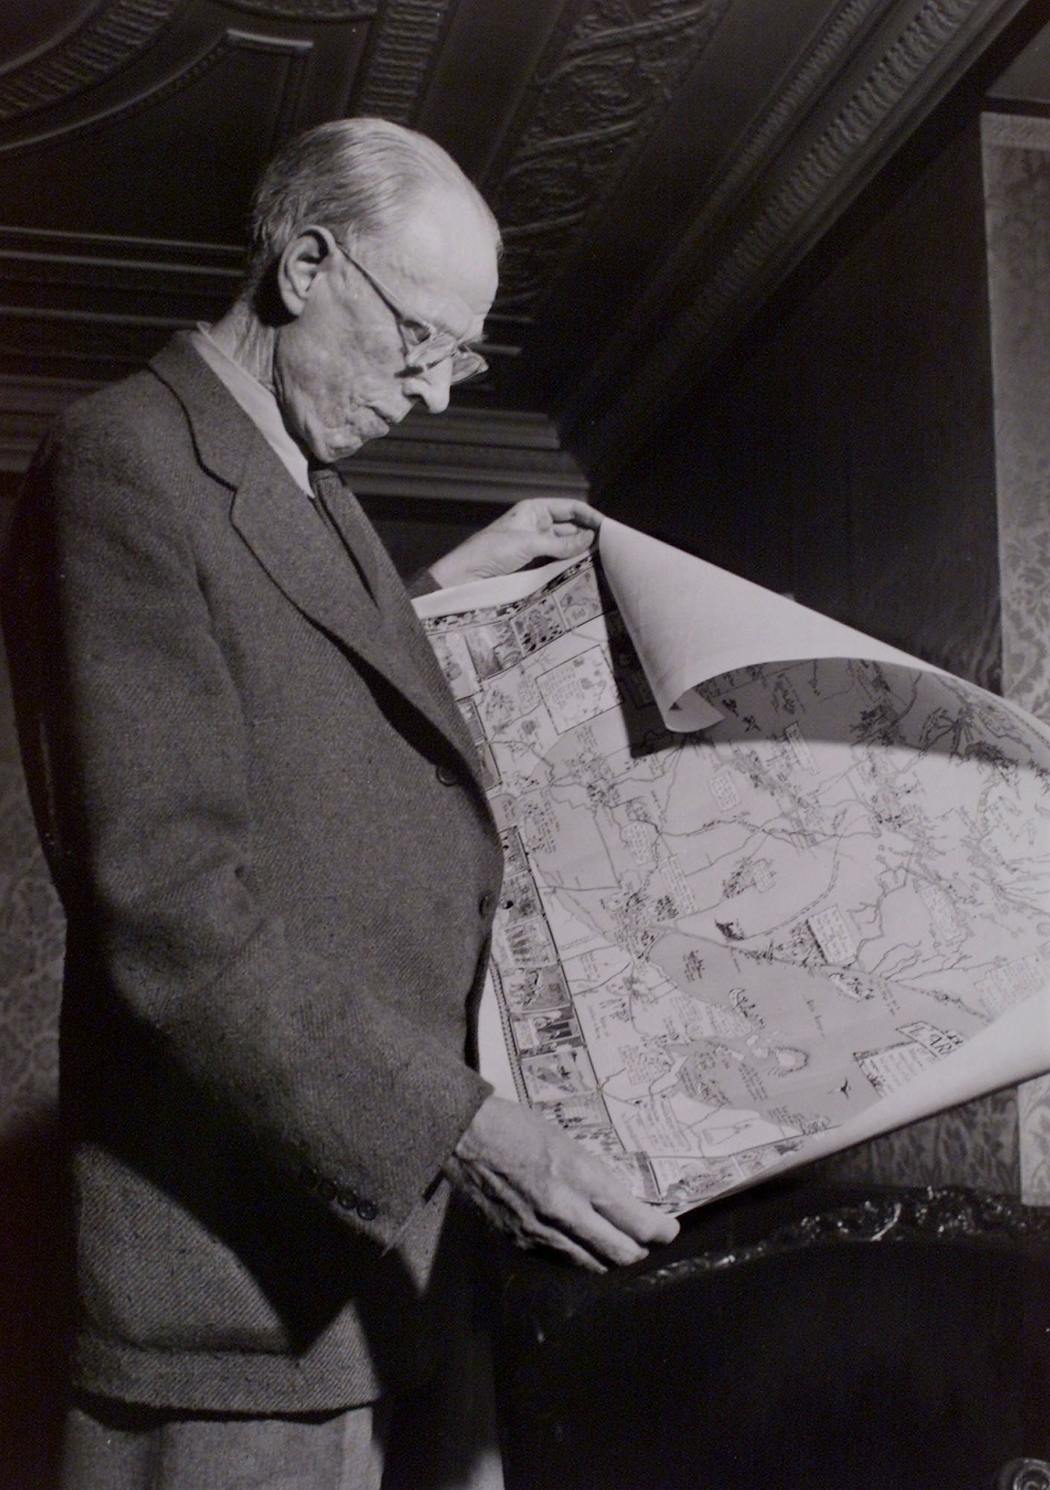 Historical photo of Sinclair Lewis looking at map of the Arrowhead region of Minnesota in 1944, when he was living and writing in Duluth.